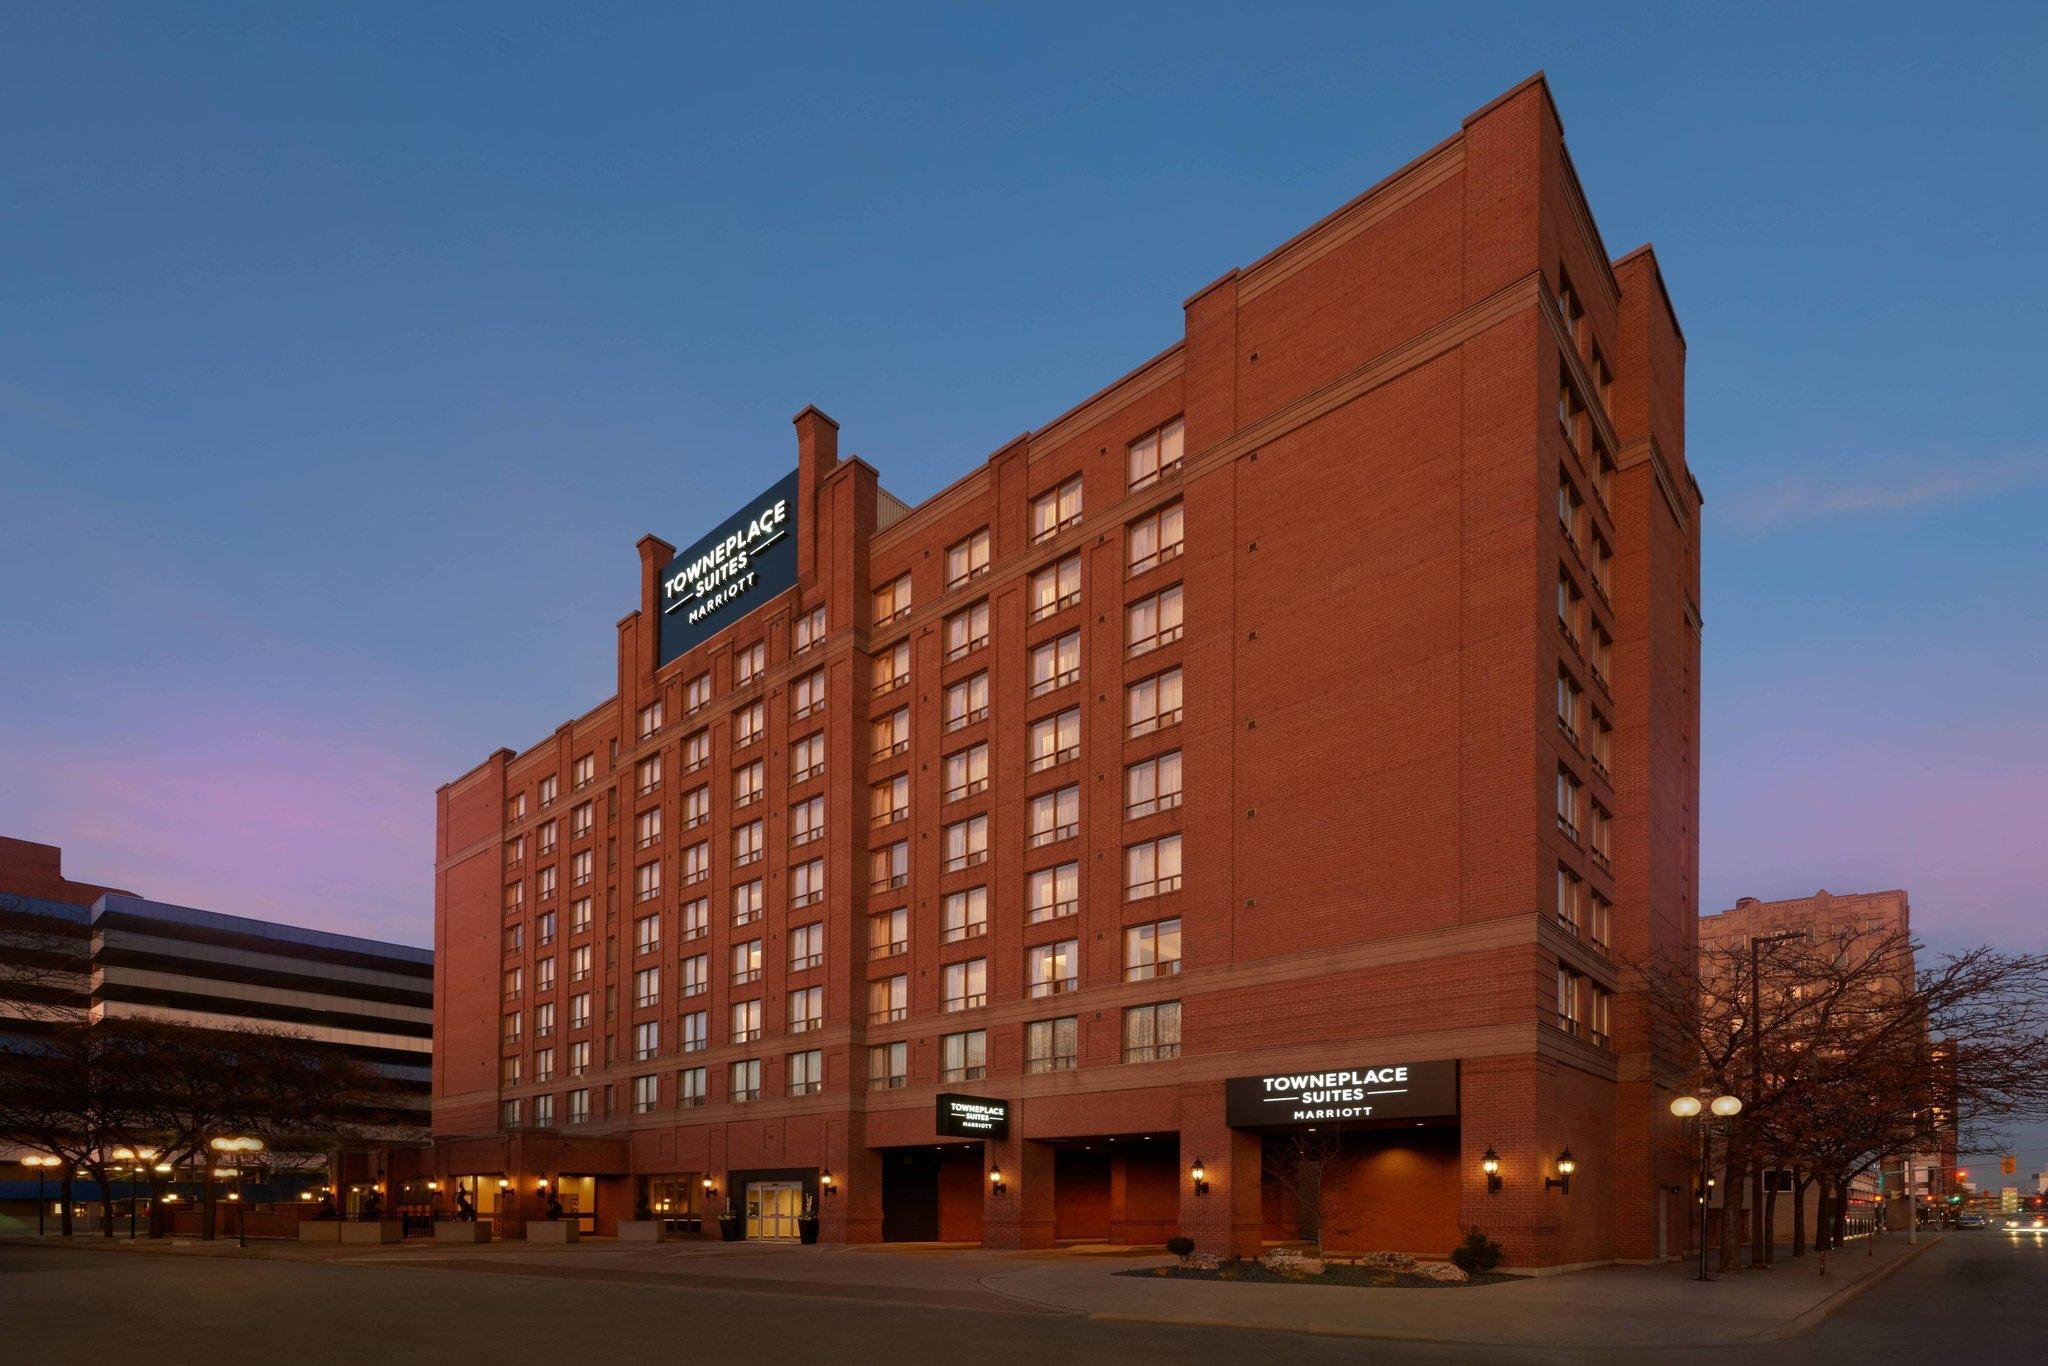 TownePlace Suites by Marriott Windsor image